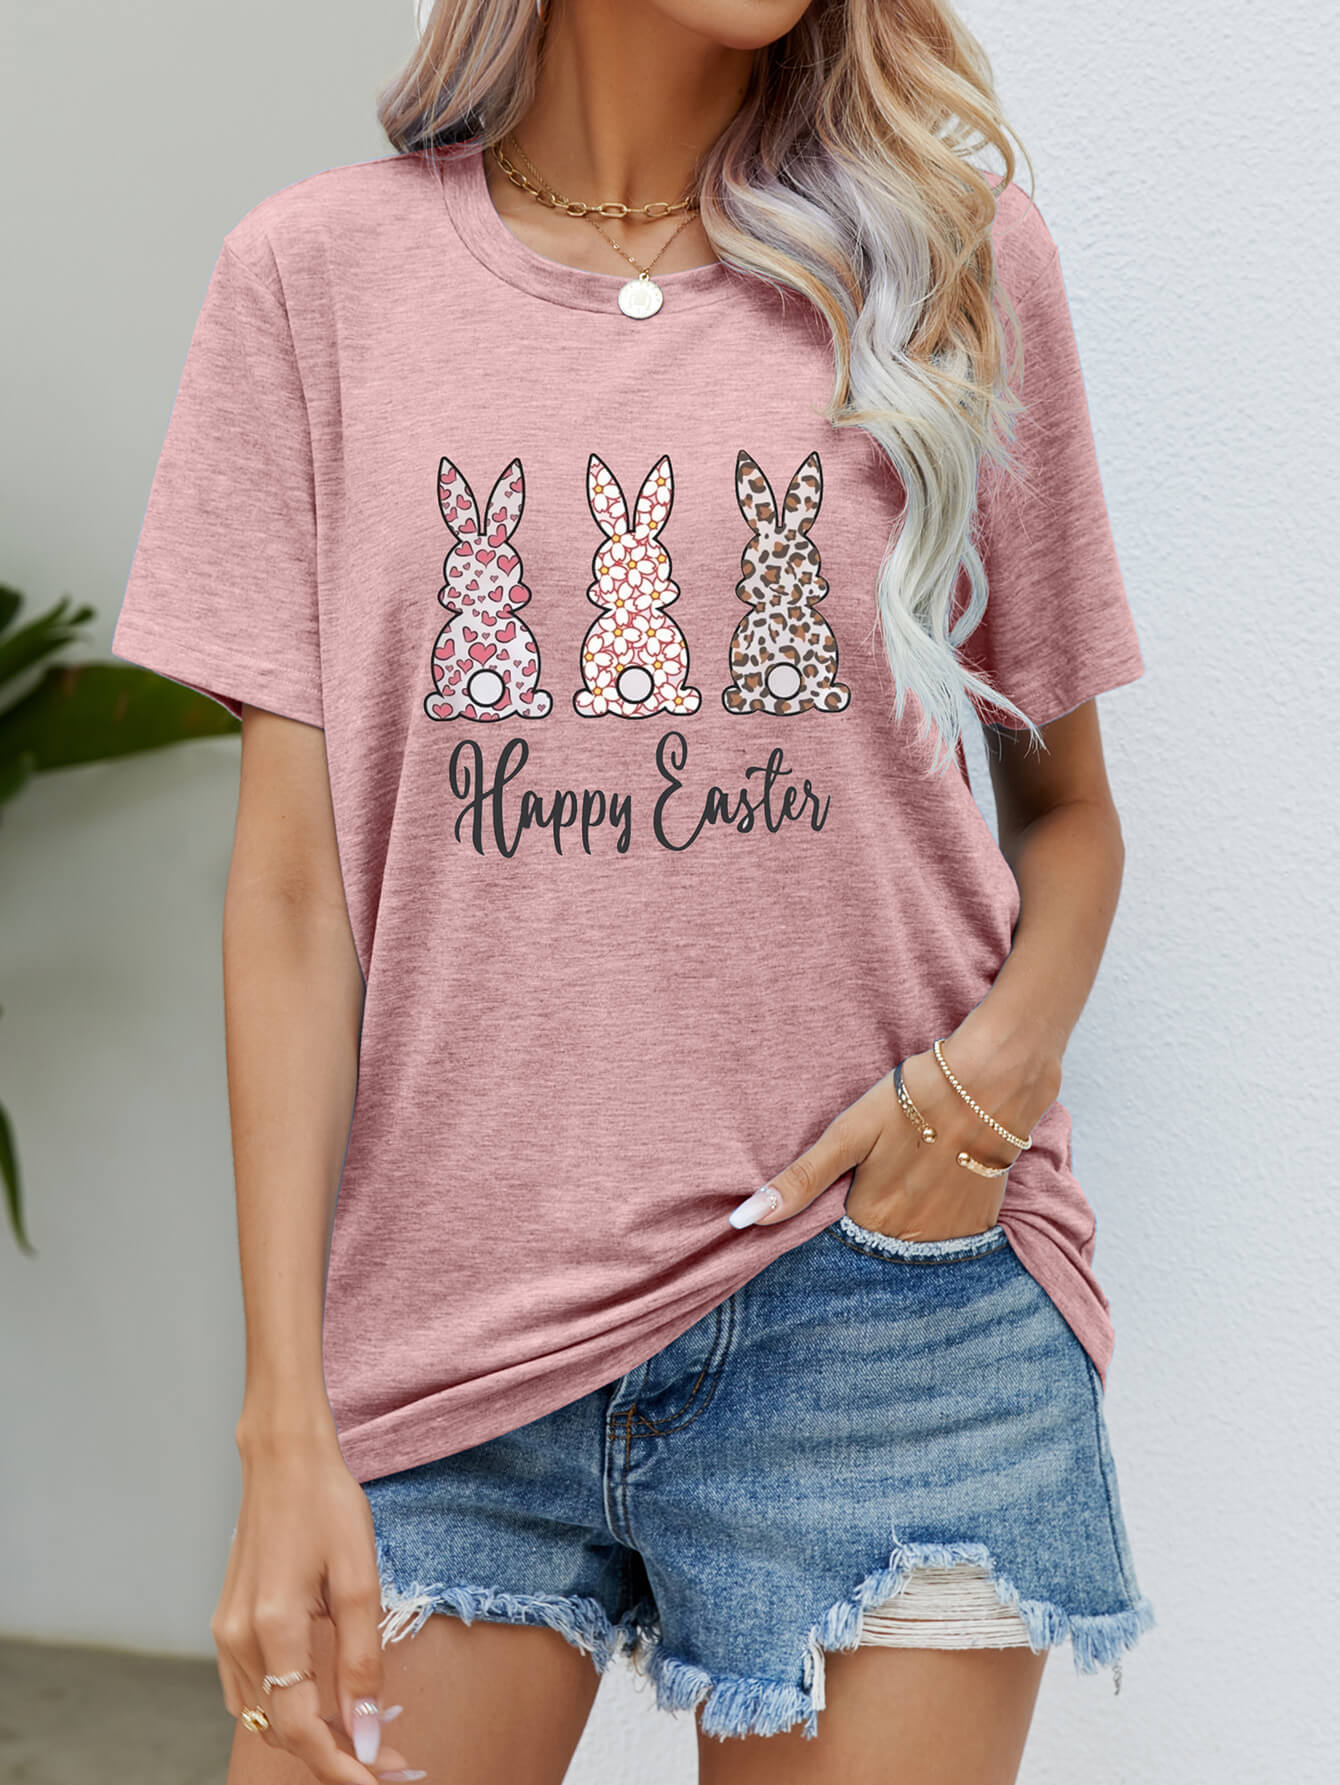 HAPPY EASTER Graphic Short Sleeve Tee - Light Pink / S - T-Shirts - Shirts & Tops - 16 - 2024